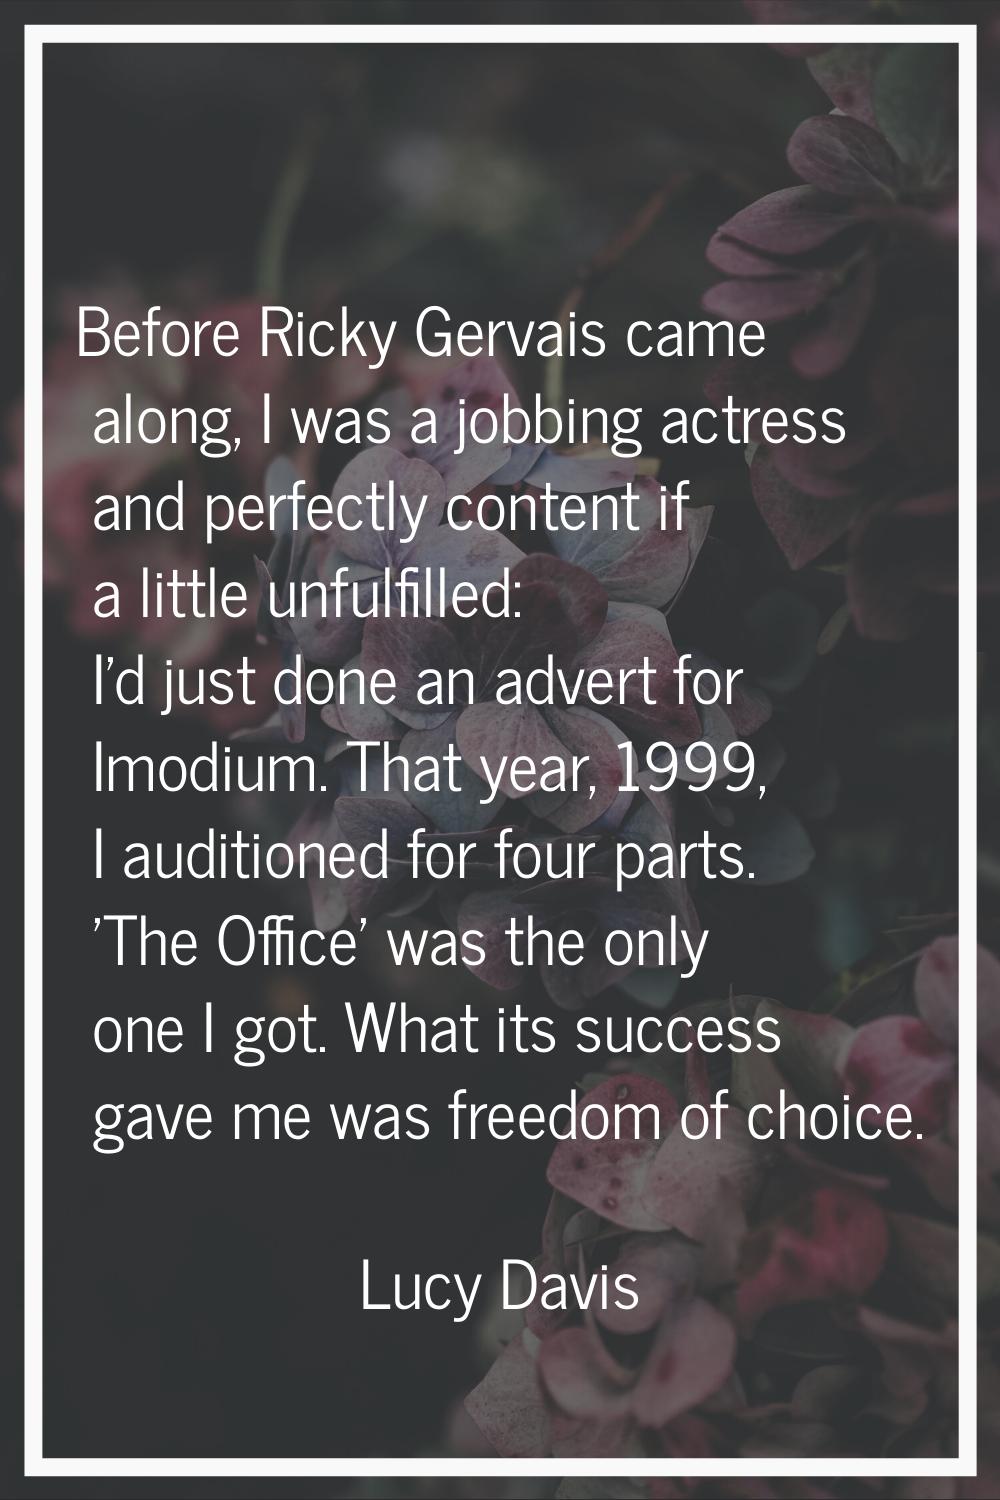 Before Ricky Gervais came along, I was a jobbing actress and perfectly content if a little unfulfil